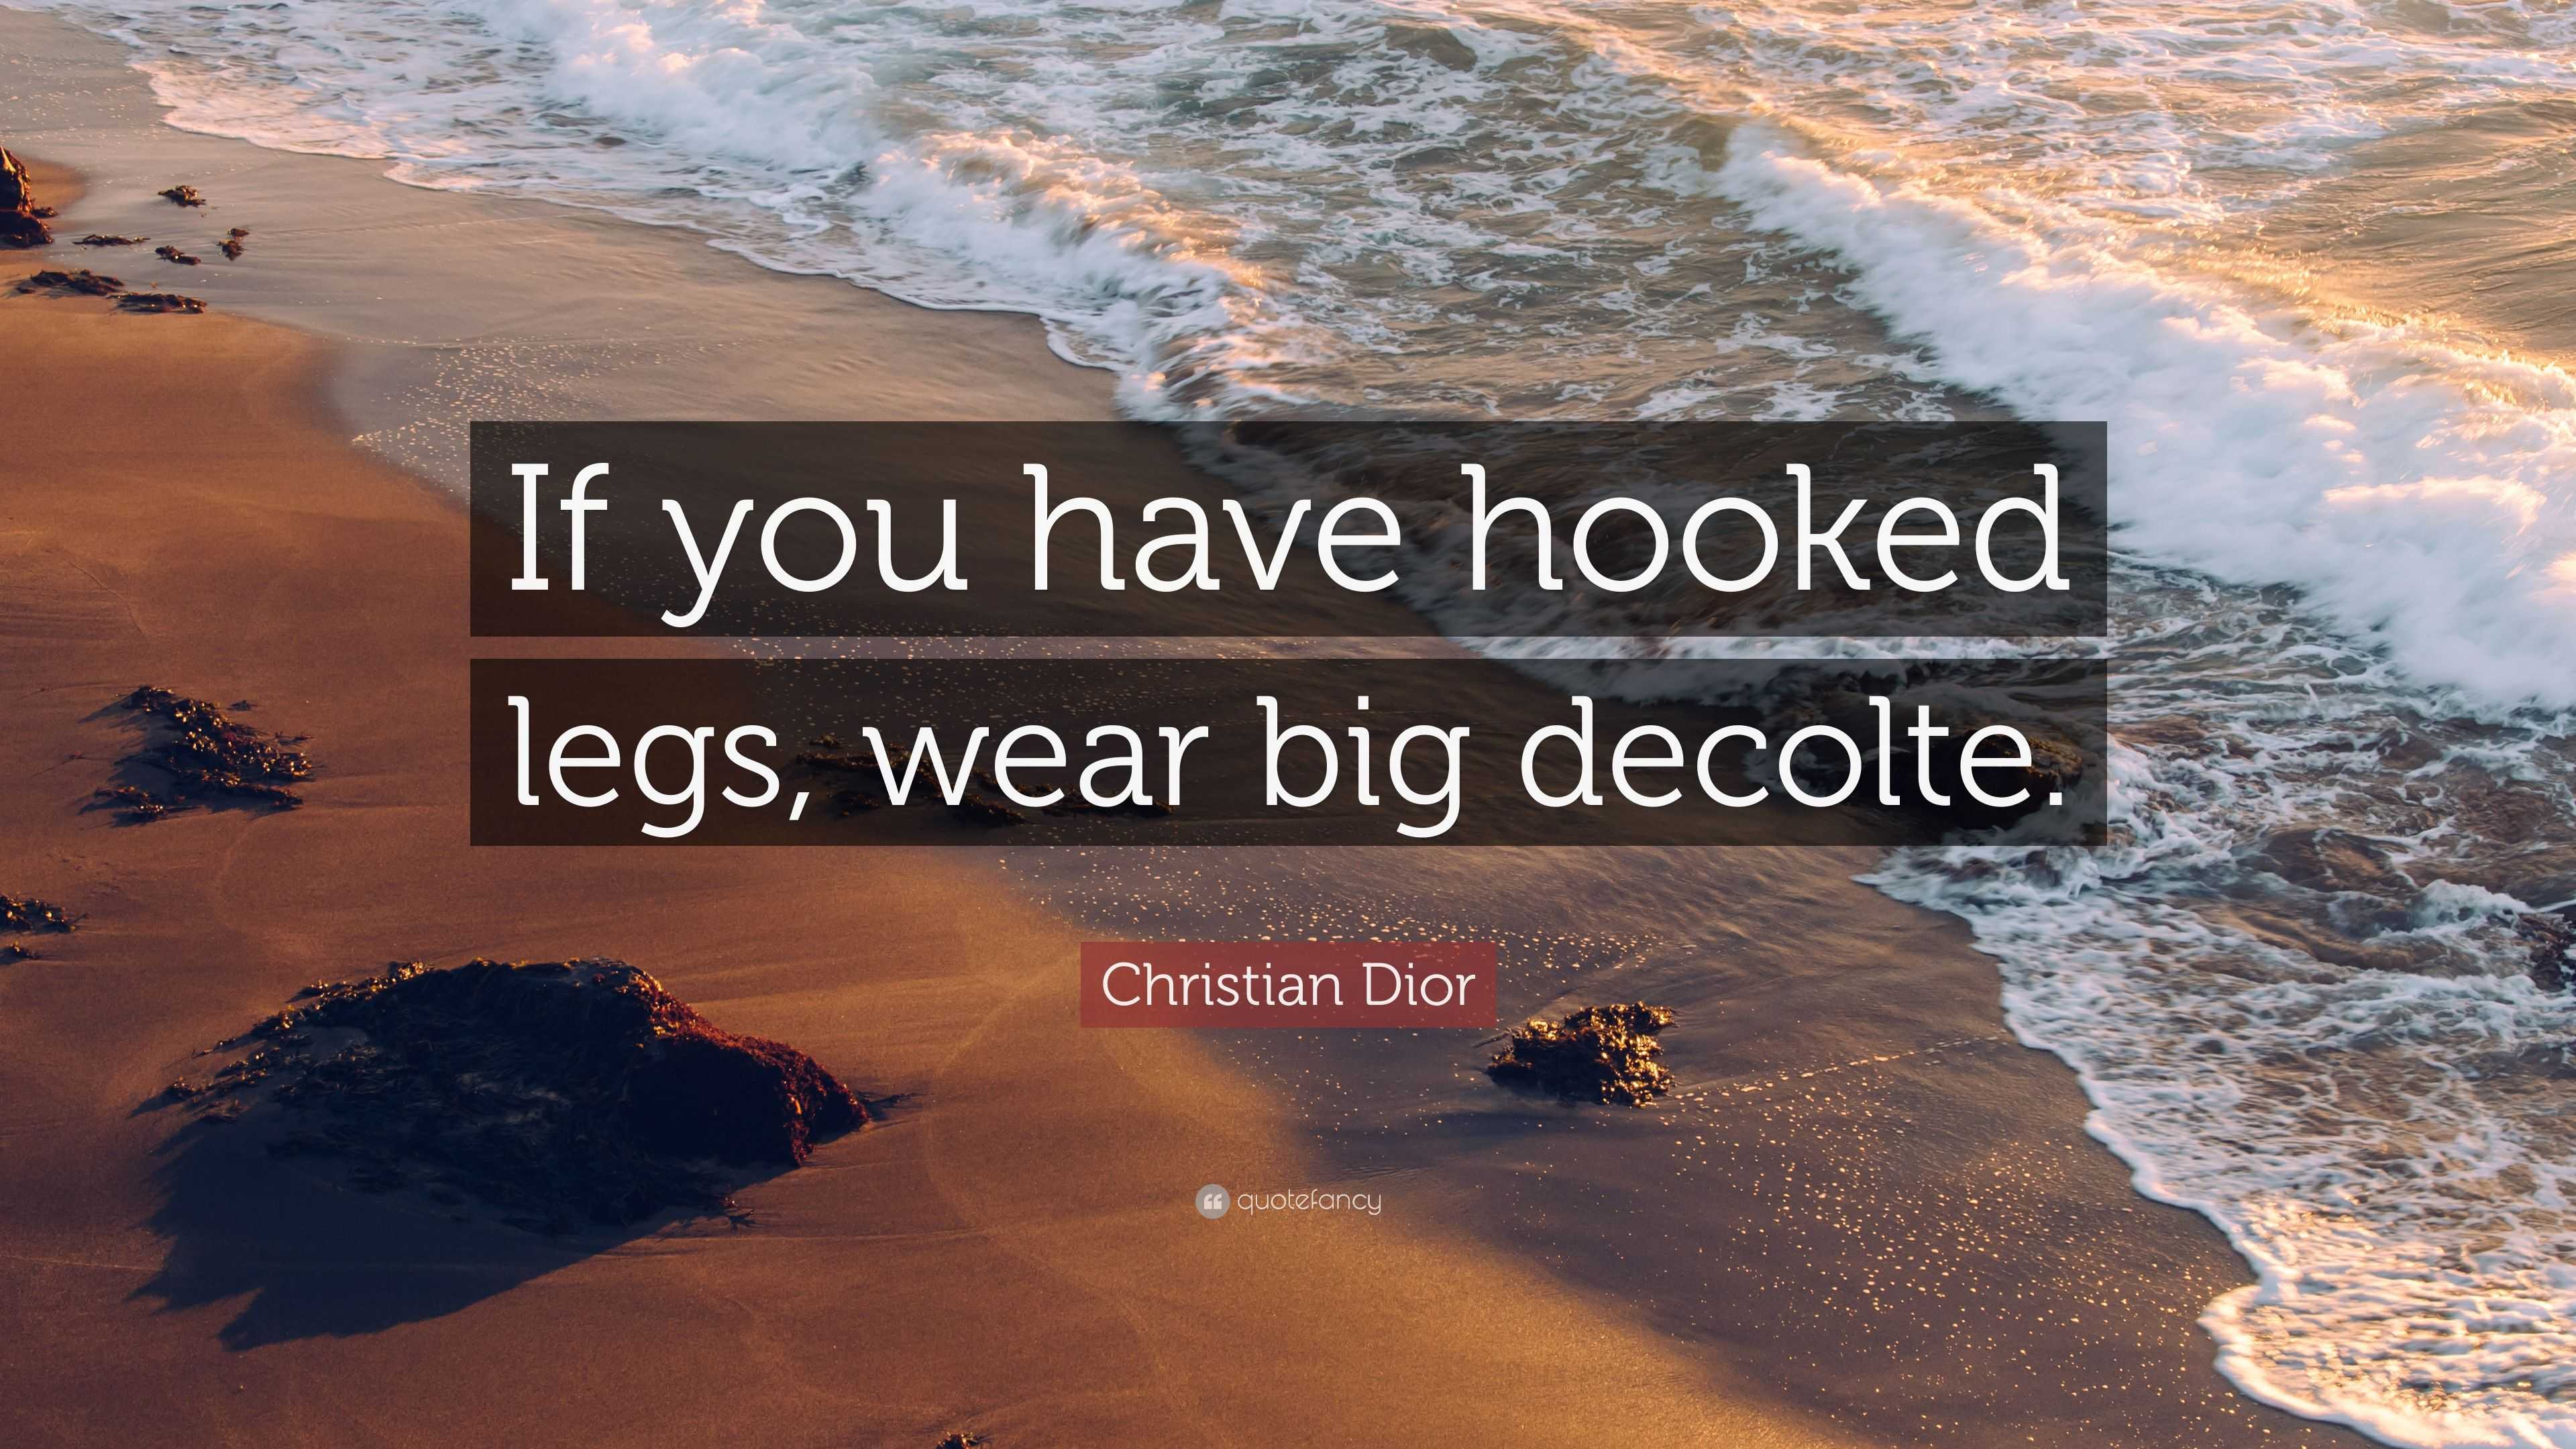 Christian Dior Quote: “If you have hooked legs, wear big decolte.”